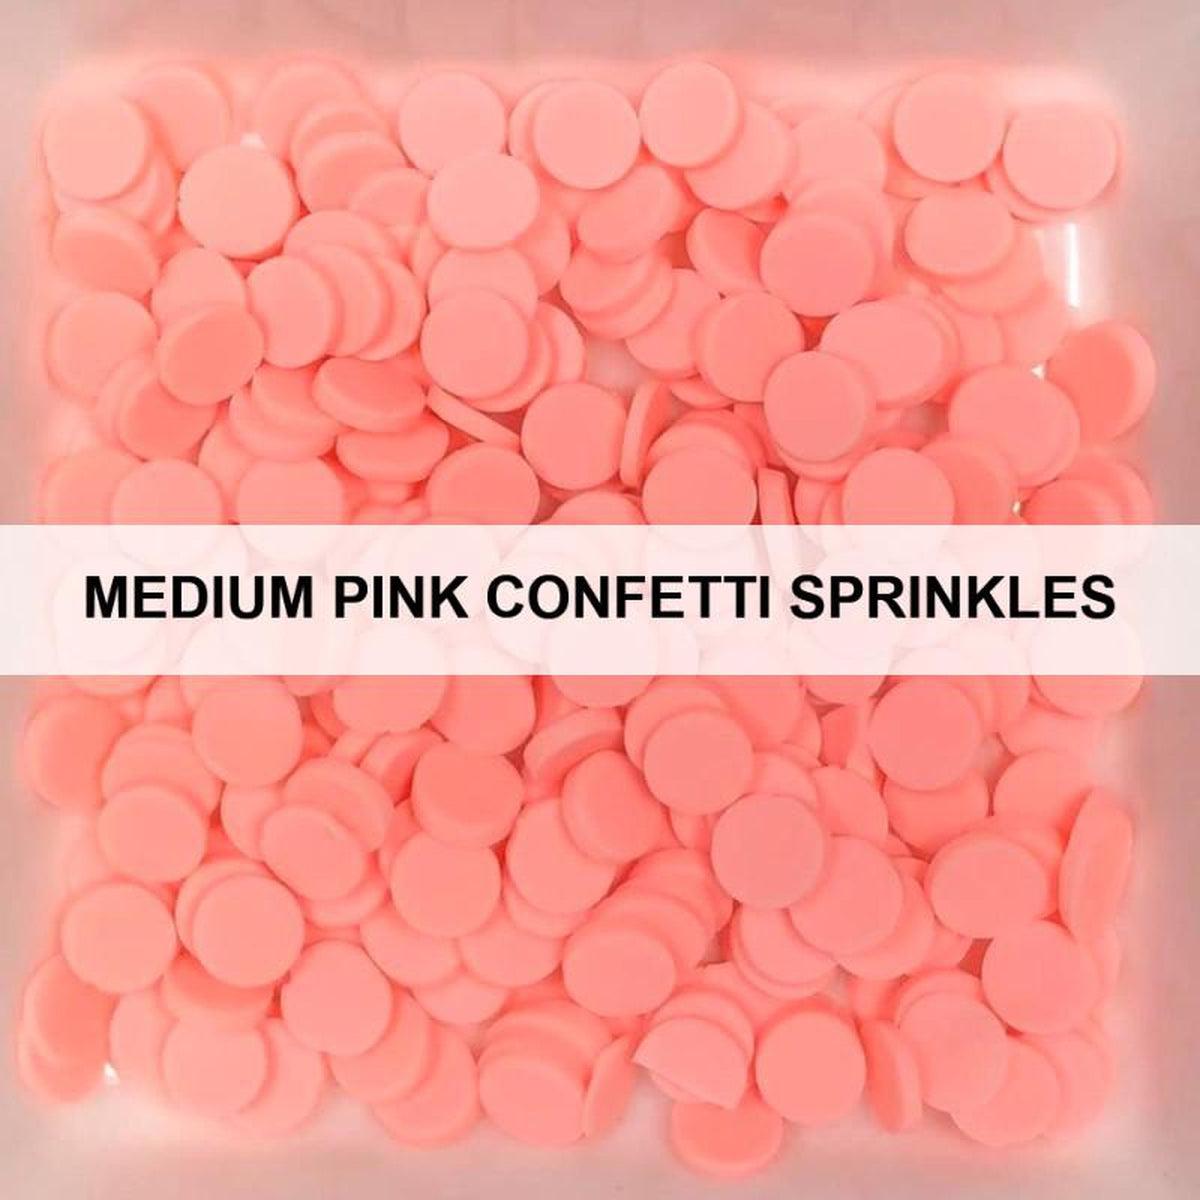 Medium Pink Confetti Sprinkles by Kat Scrappiness - Kat Scrappiness